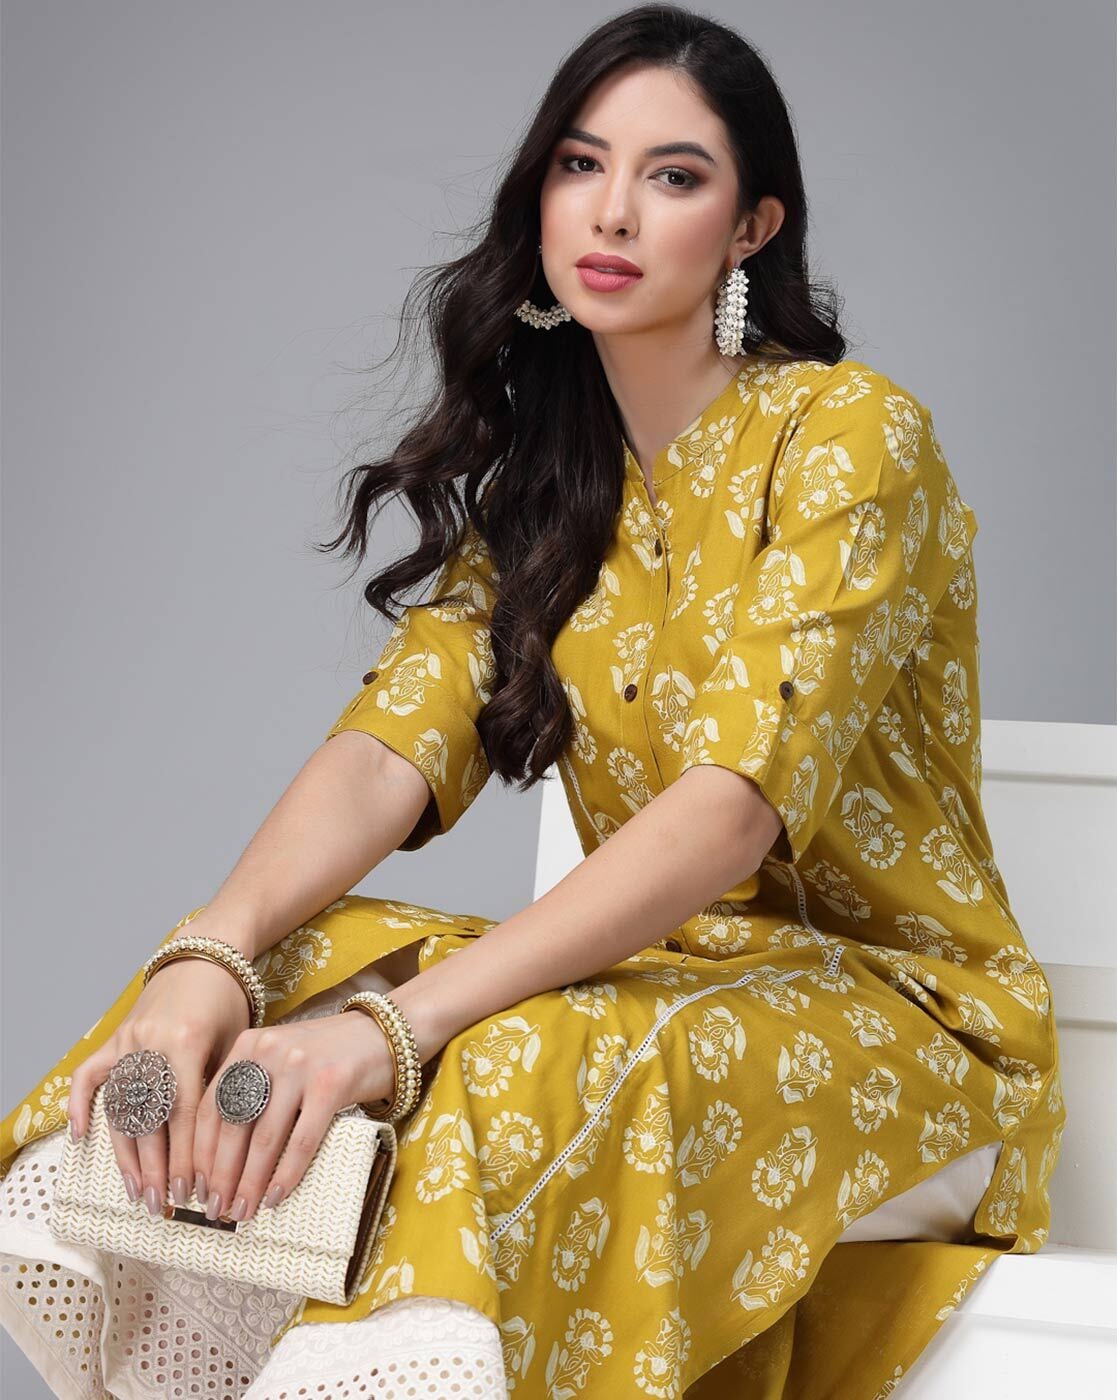 Wholesale Kurtis Surat: Starting 500 Rs COD Available, 53% OFF